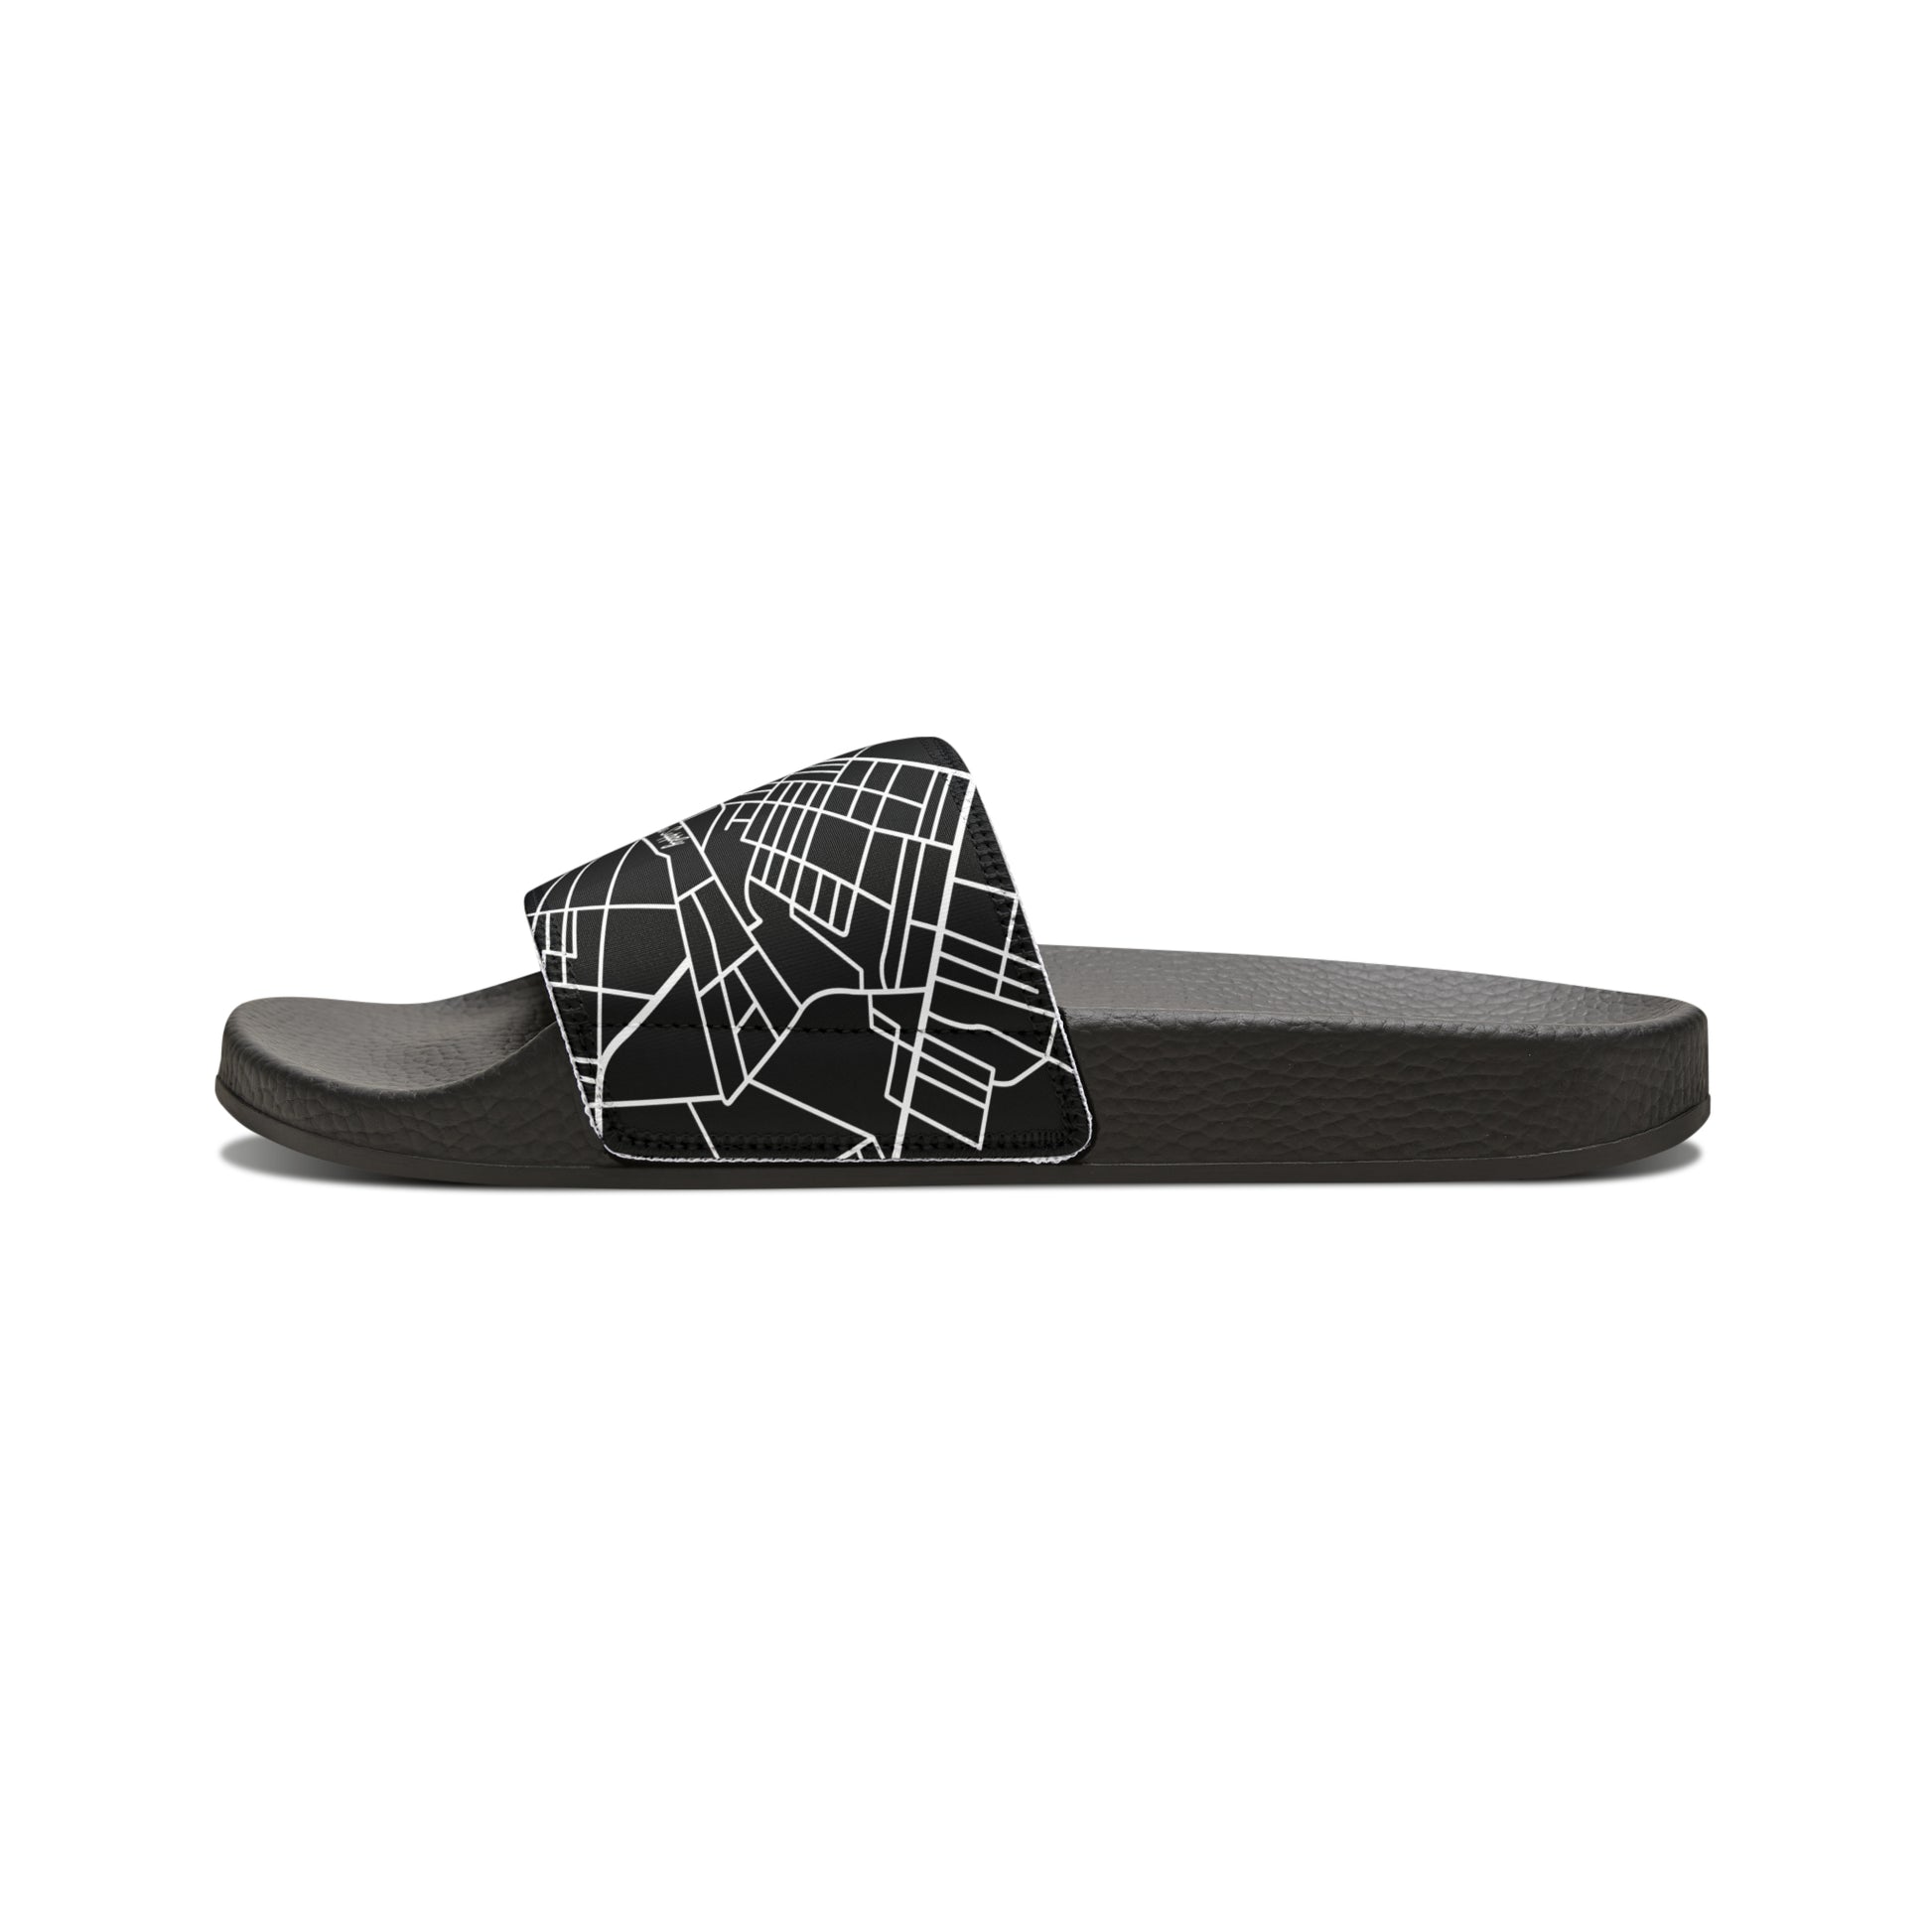 Route Runners Taxi Women's Slides Ergonomic Sandals - Been Dope Supply